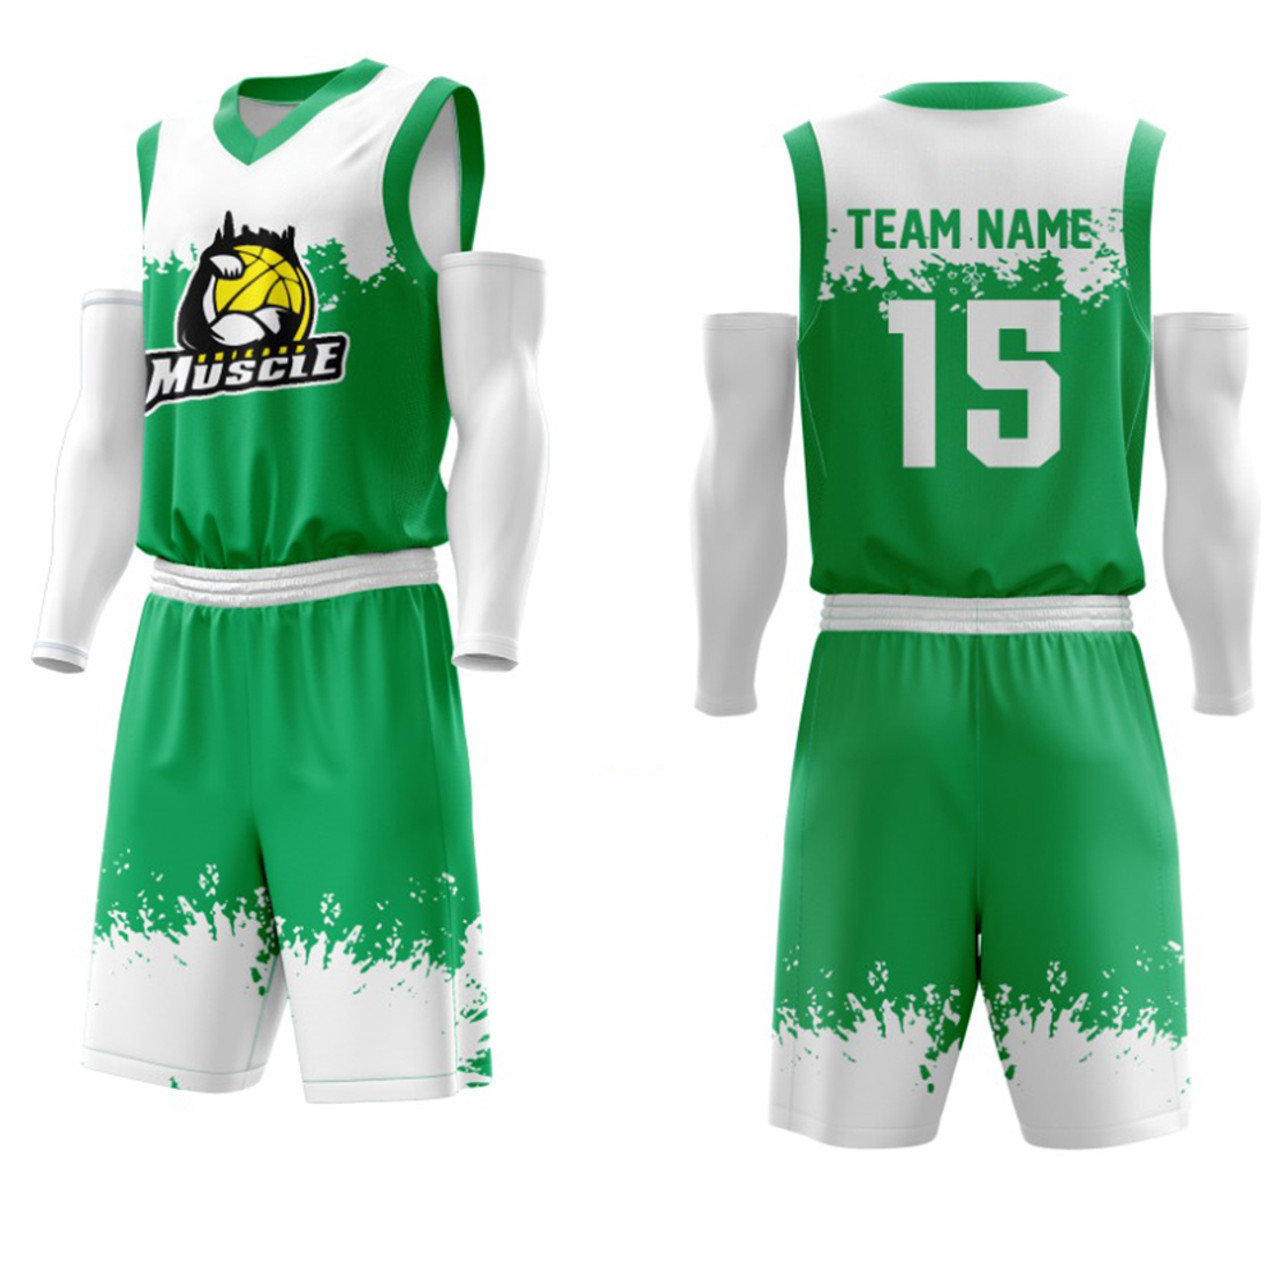 Guirenco Custom Jersey,Custom Men Basketball Jerseys with Name and